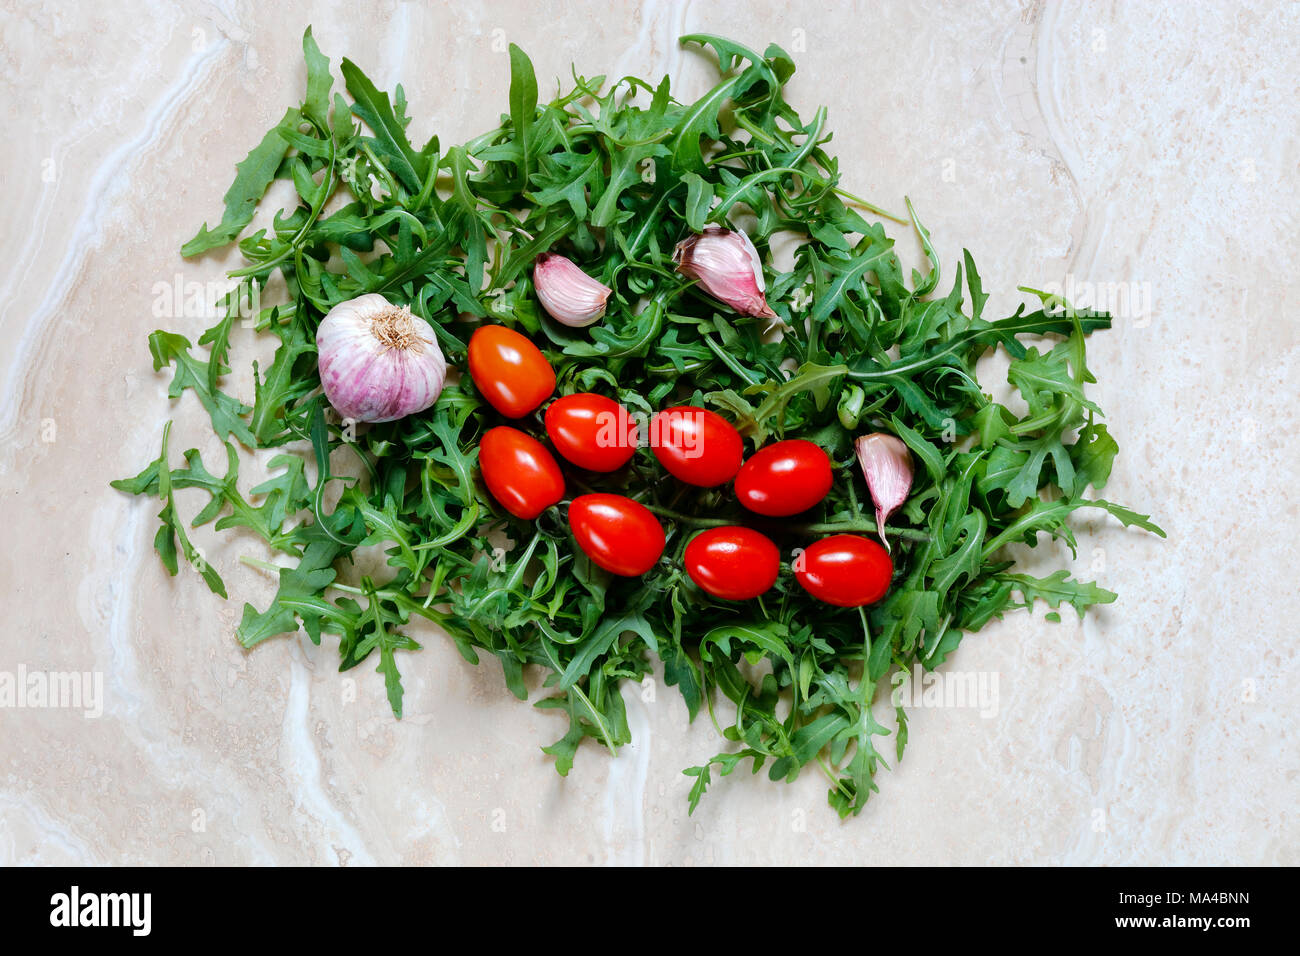 Rocket Arugula with plum tomatoes and garlic for Italian food on marble table Stock Photo